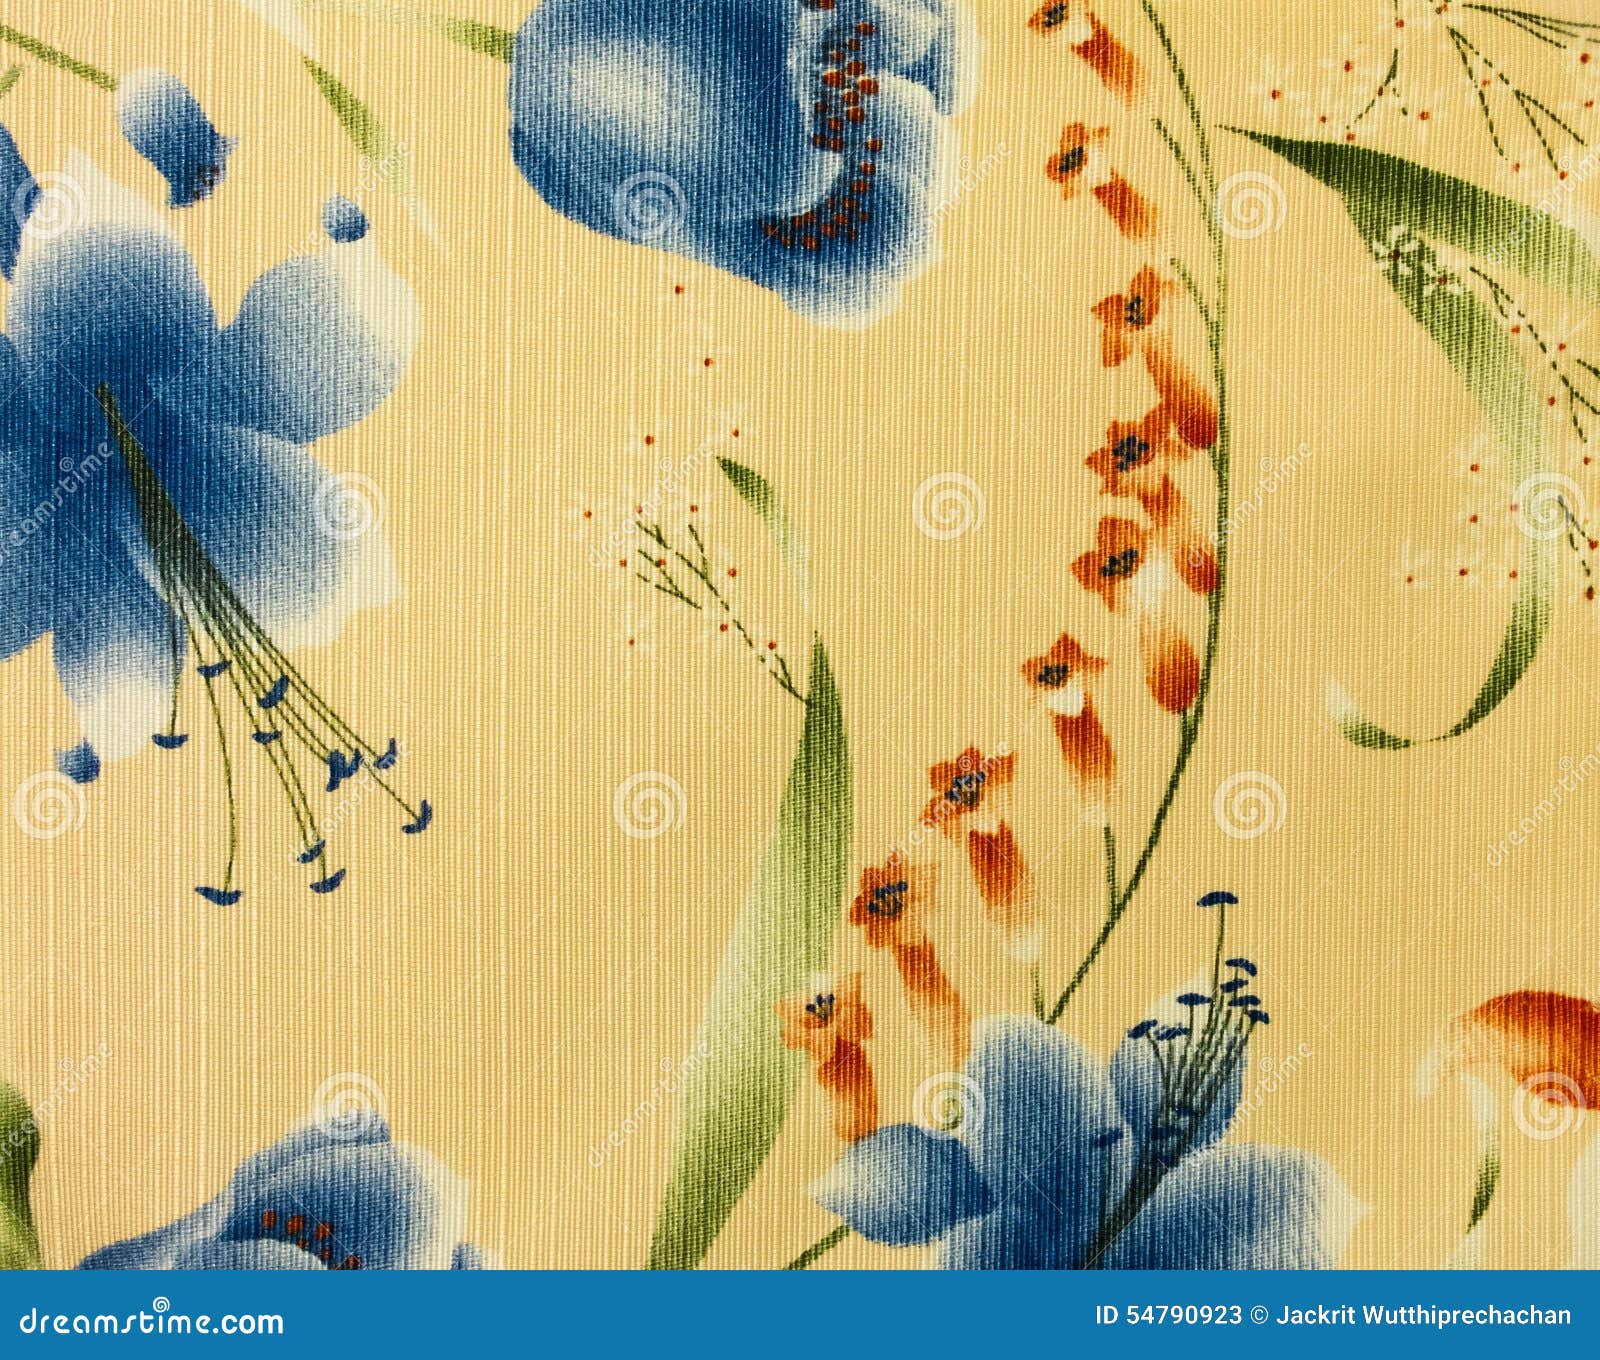 Free Vector  Vintage red and blue floral pattern background  featuring  public domain artworks